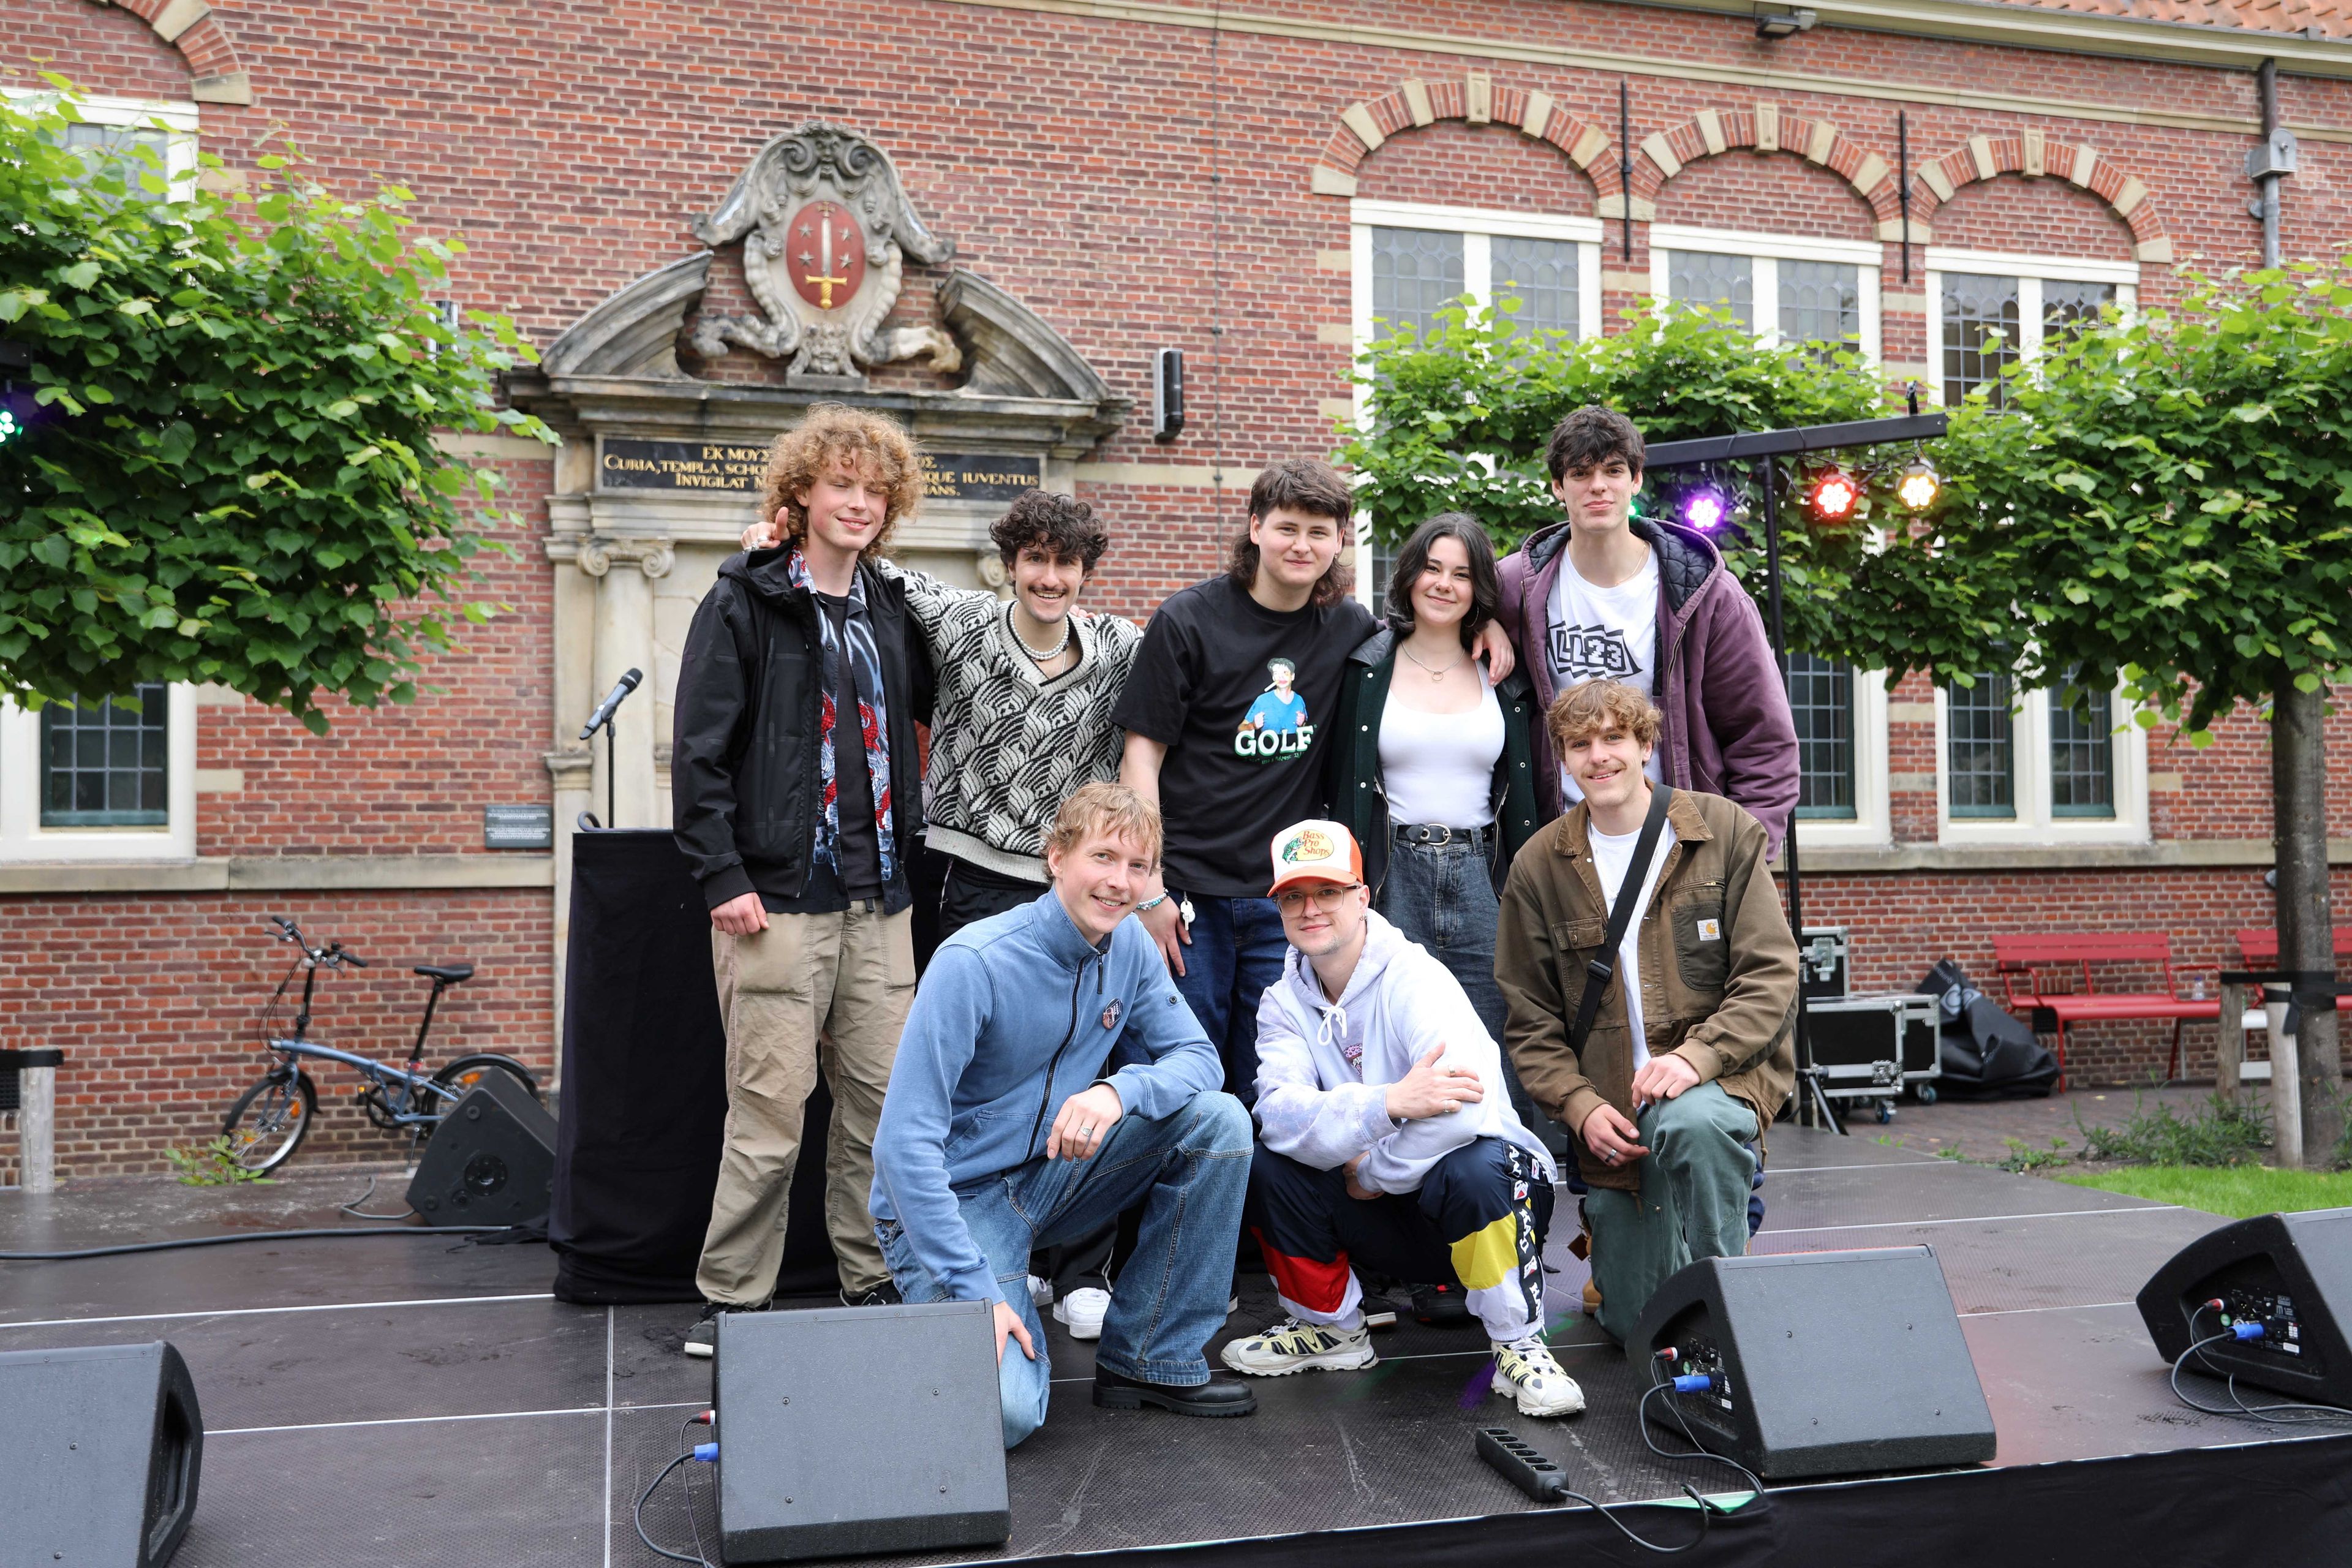 Group of young people who organised arts and culture festival outside the box.